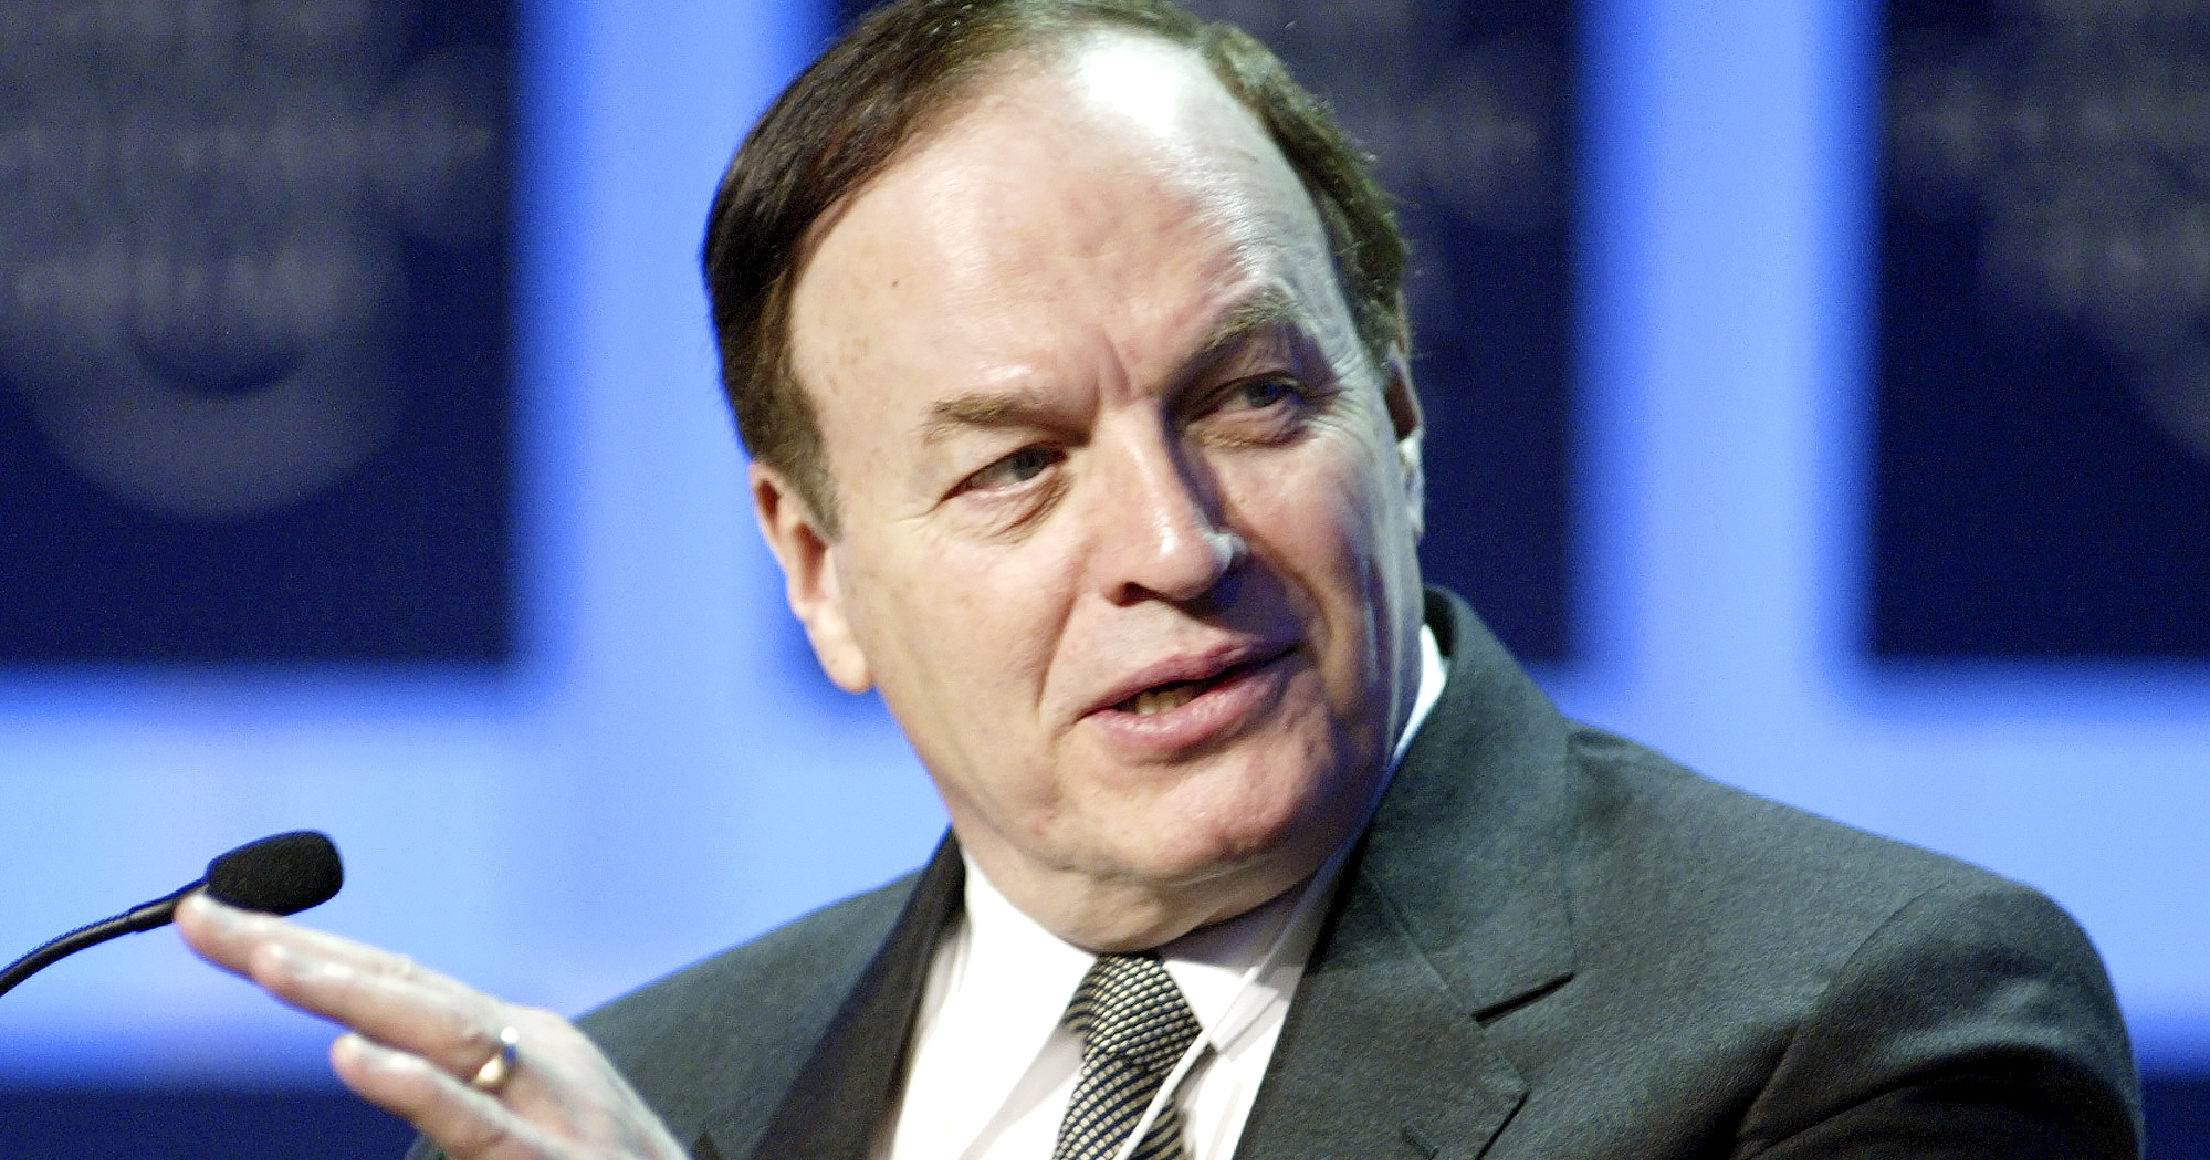 Republican Sen. Richard Shelby of Alabama speaks during the panel "A Reality Check on the US Economy" at the World Economic Forum in Davos, Switzerland, on Jan. 29, 2005.